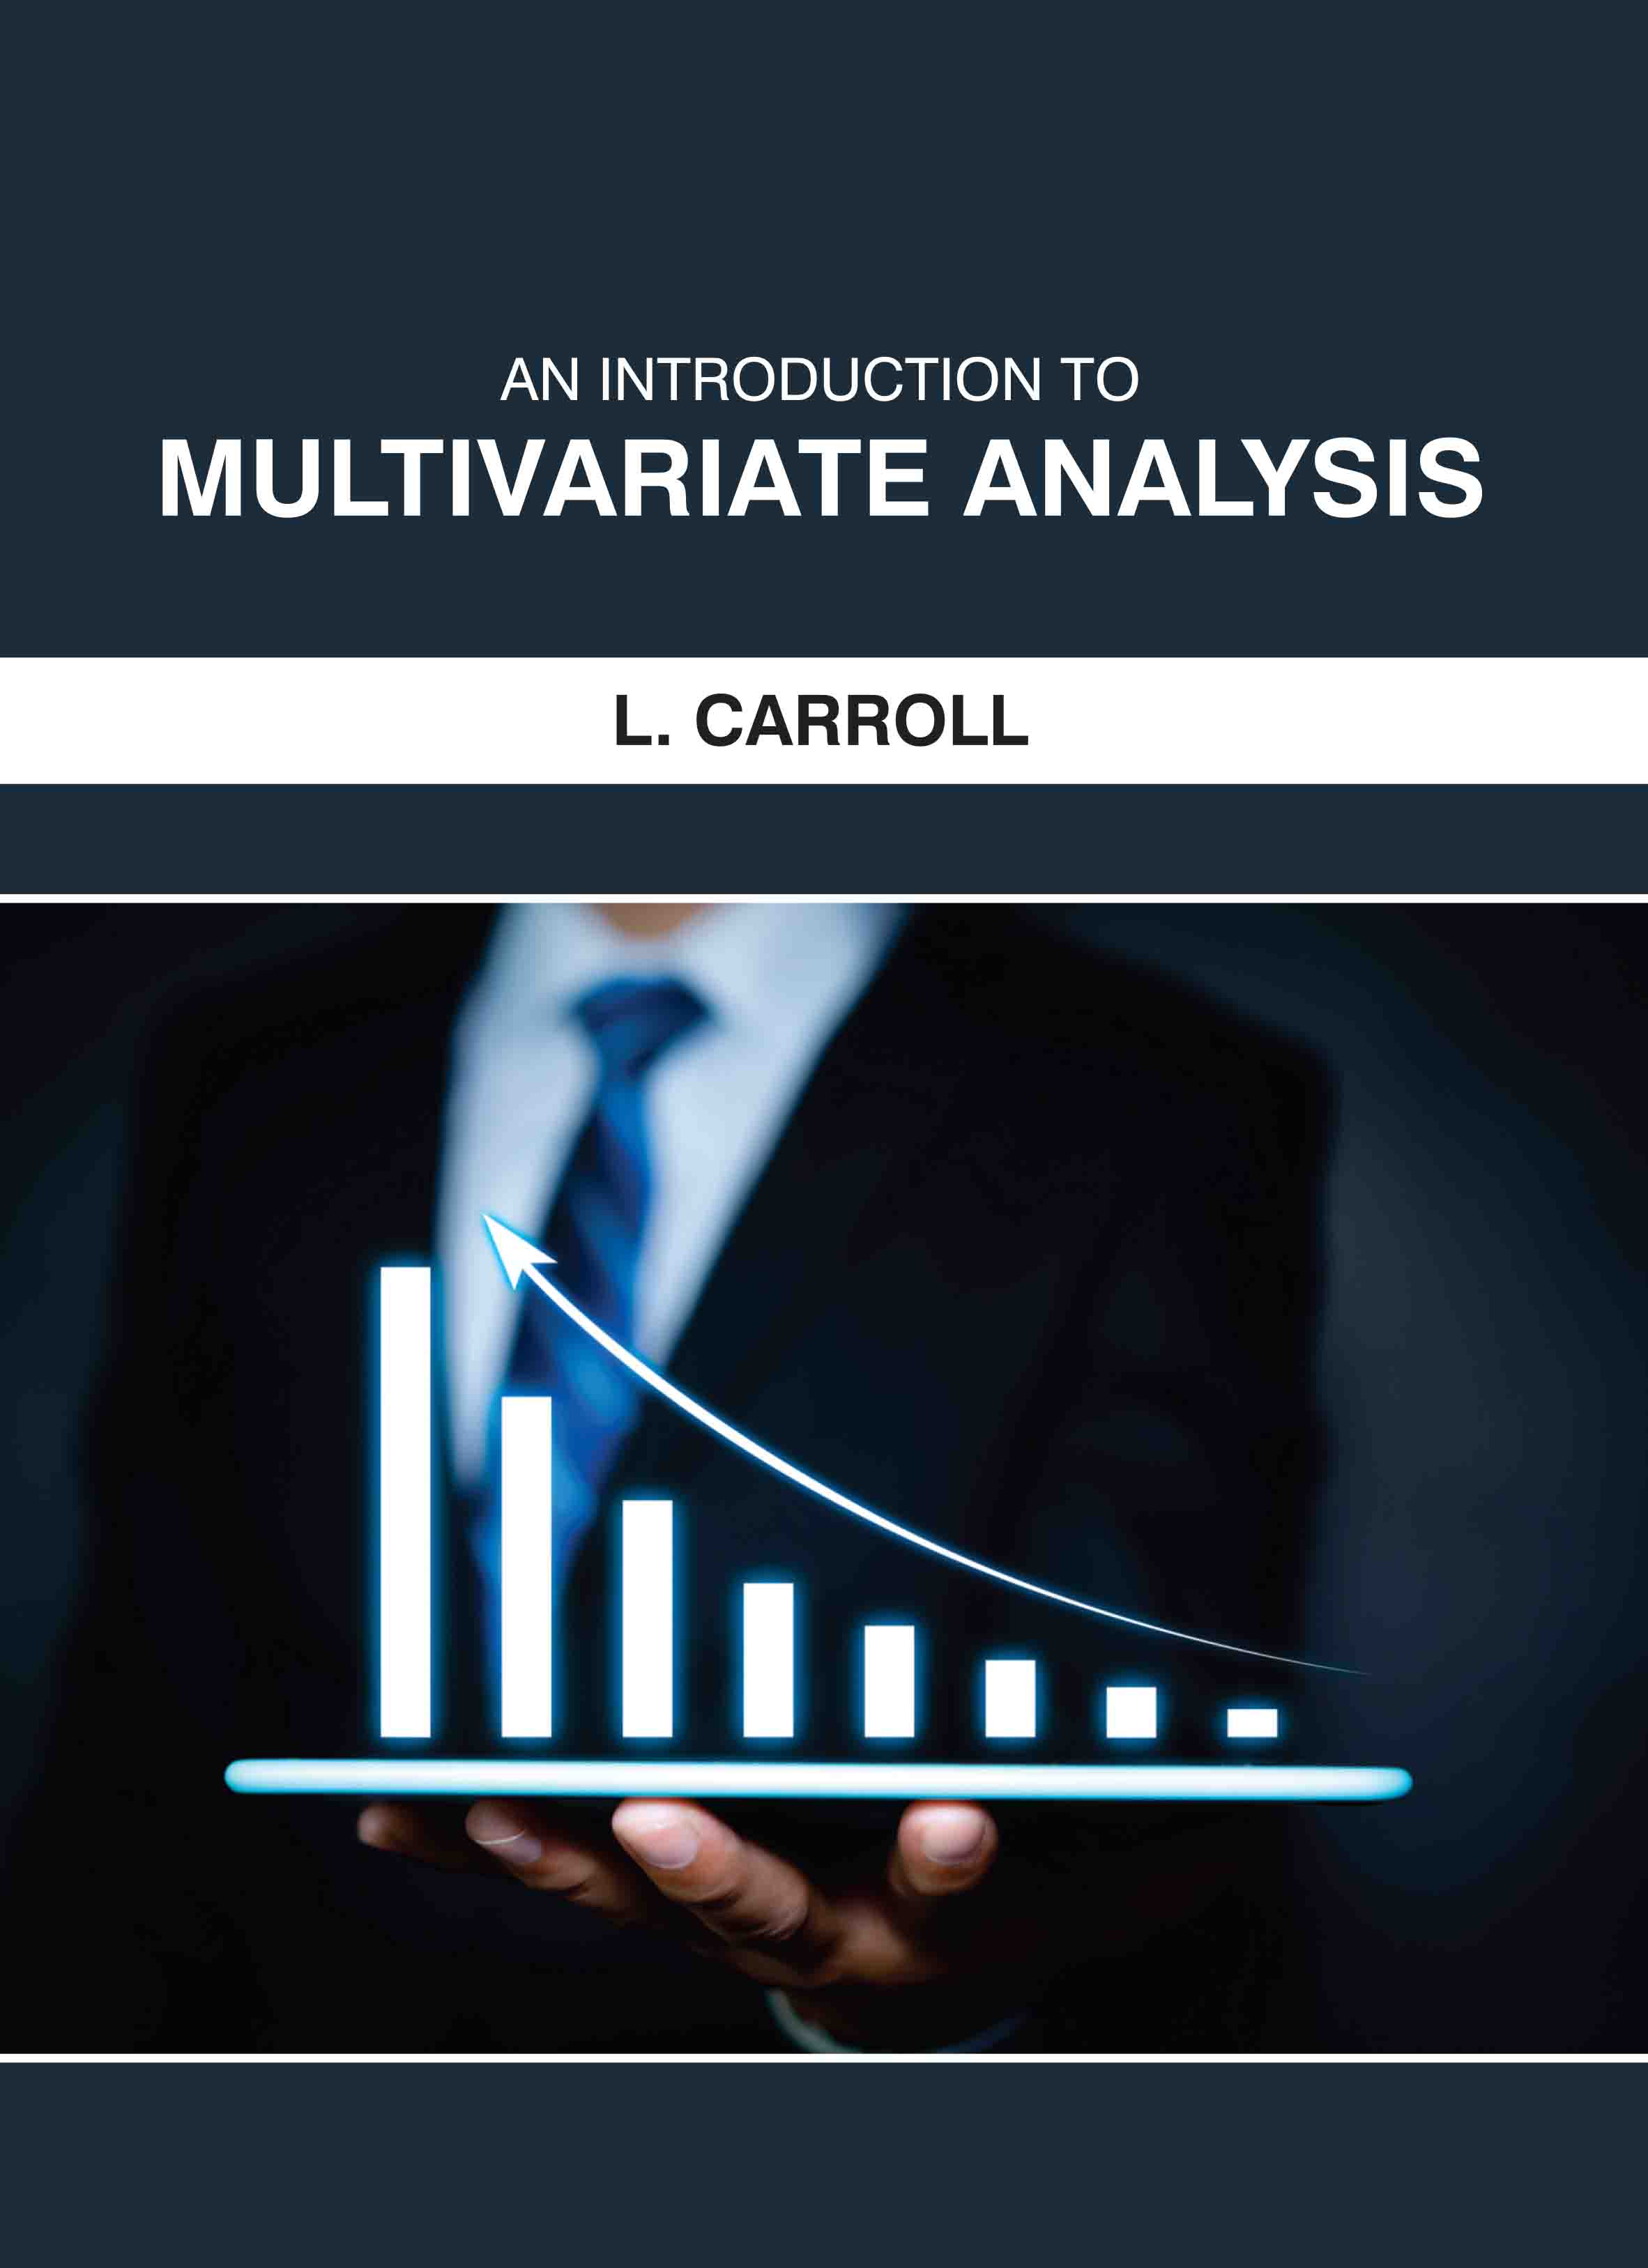 An Introduction to Multivariate Analysis